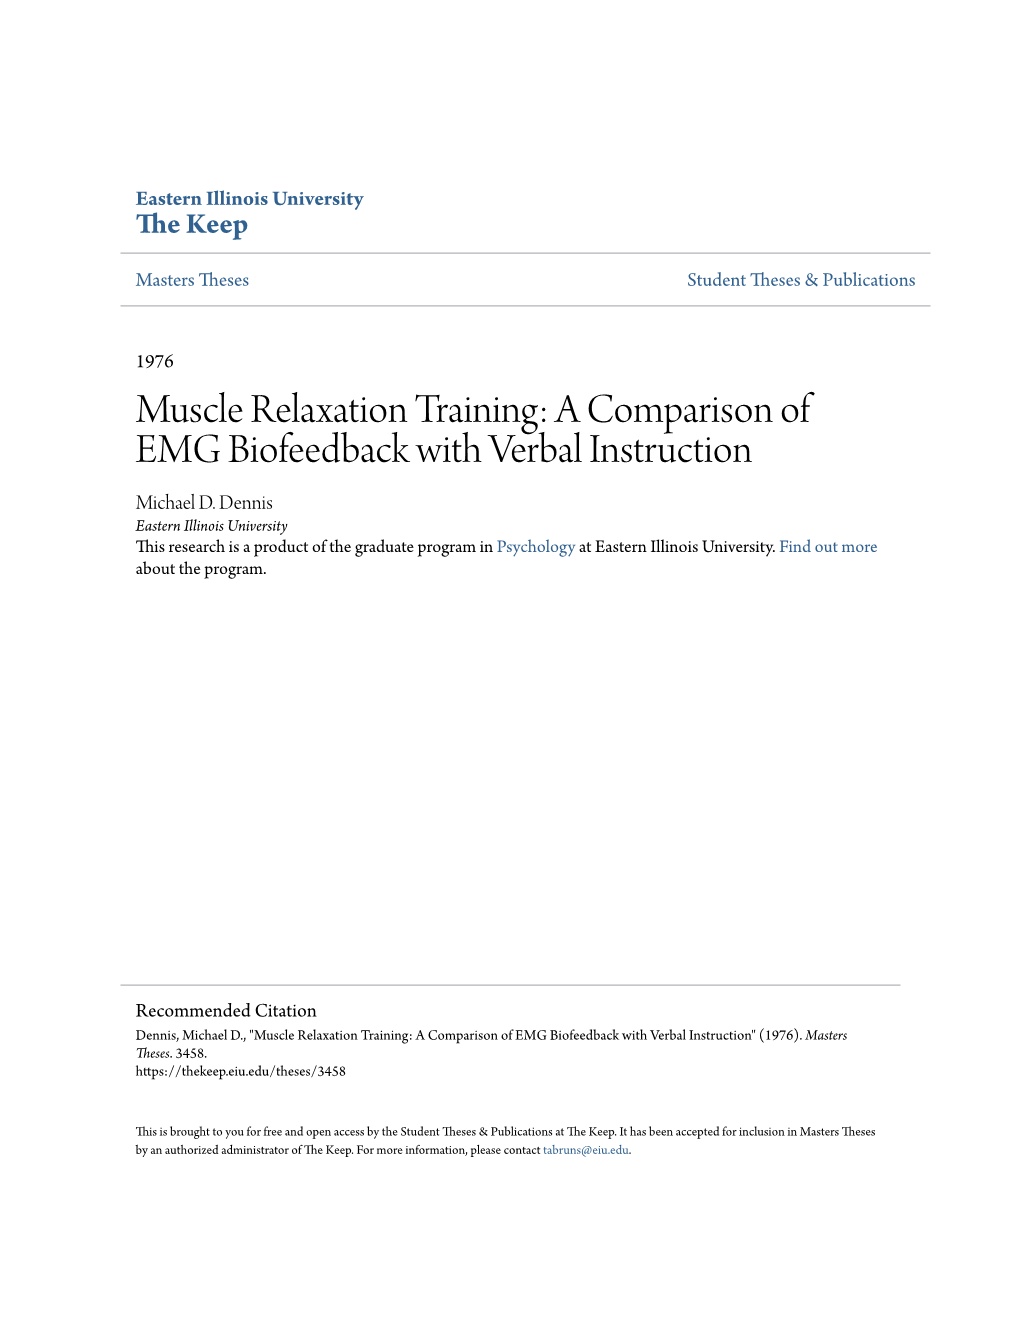 Muscle Relaxation Training: a Comparison of EMG Biofeedback with Verbal Instruction Michael D